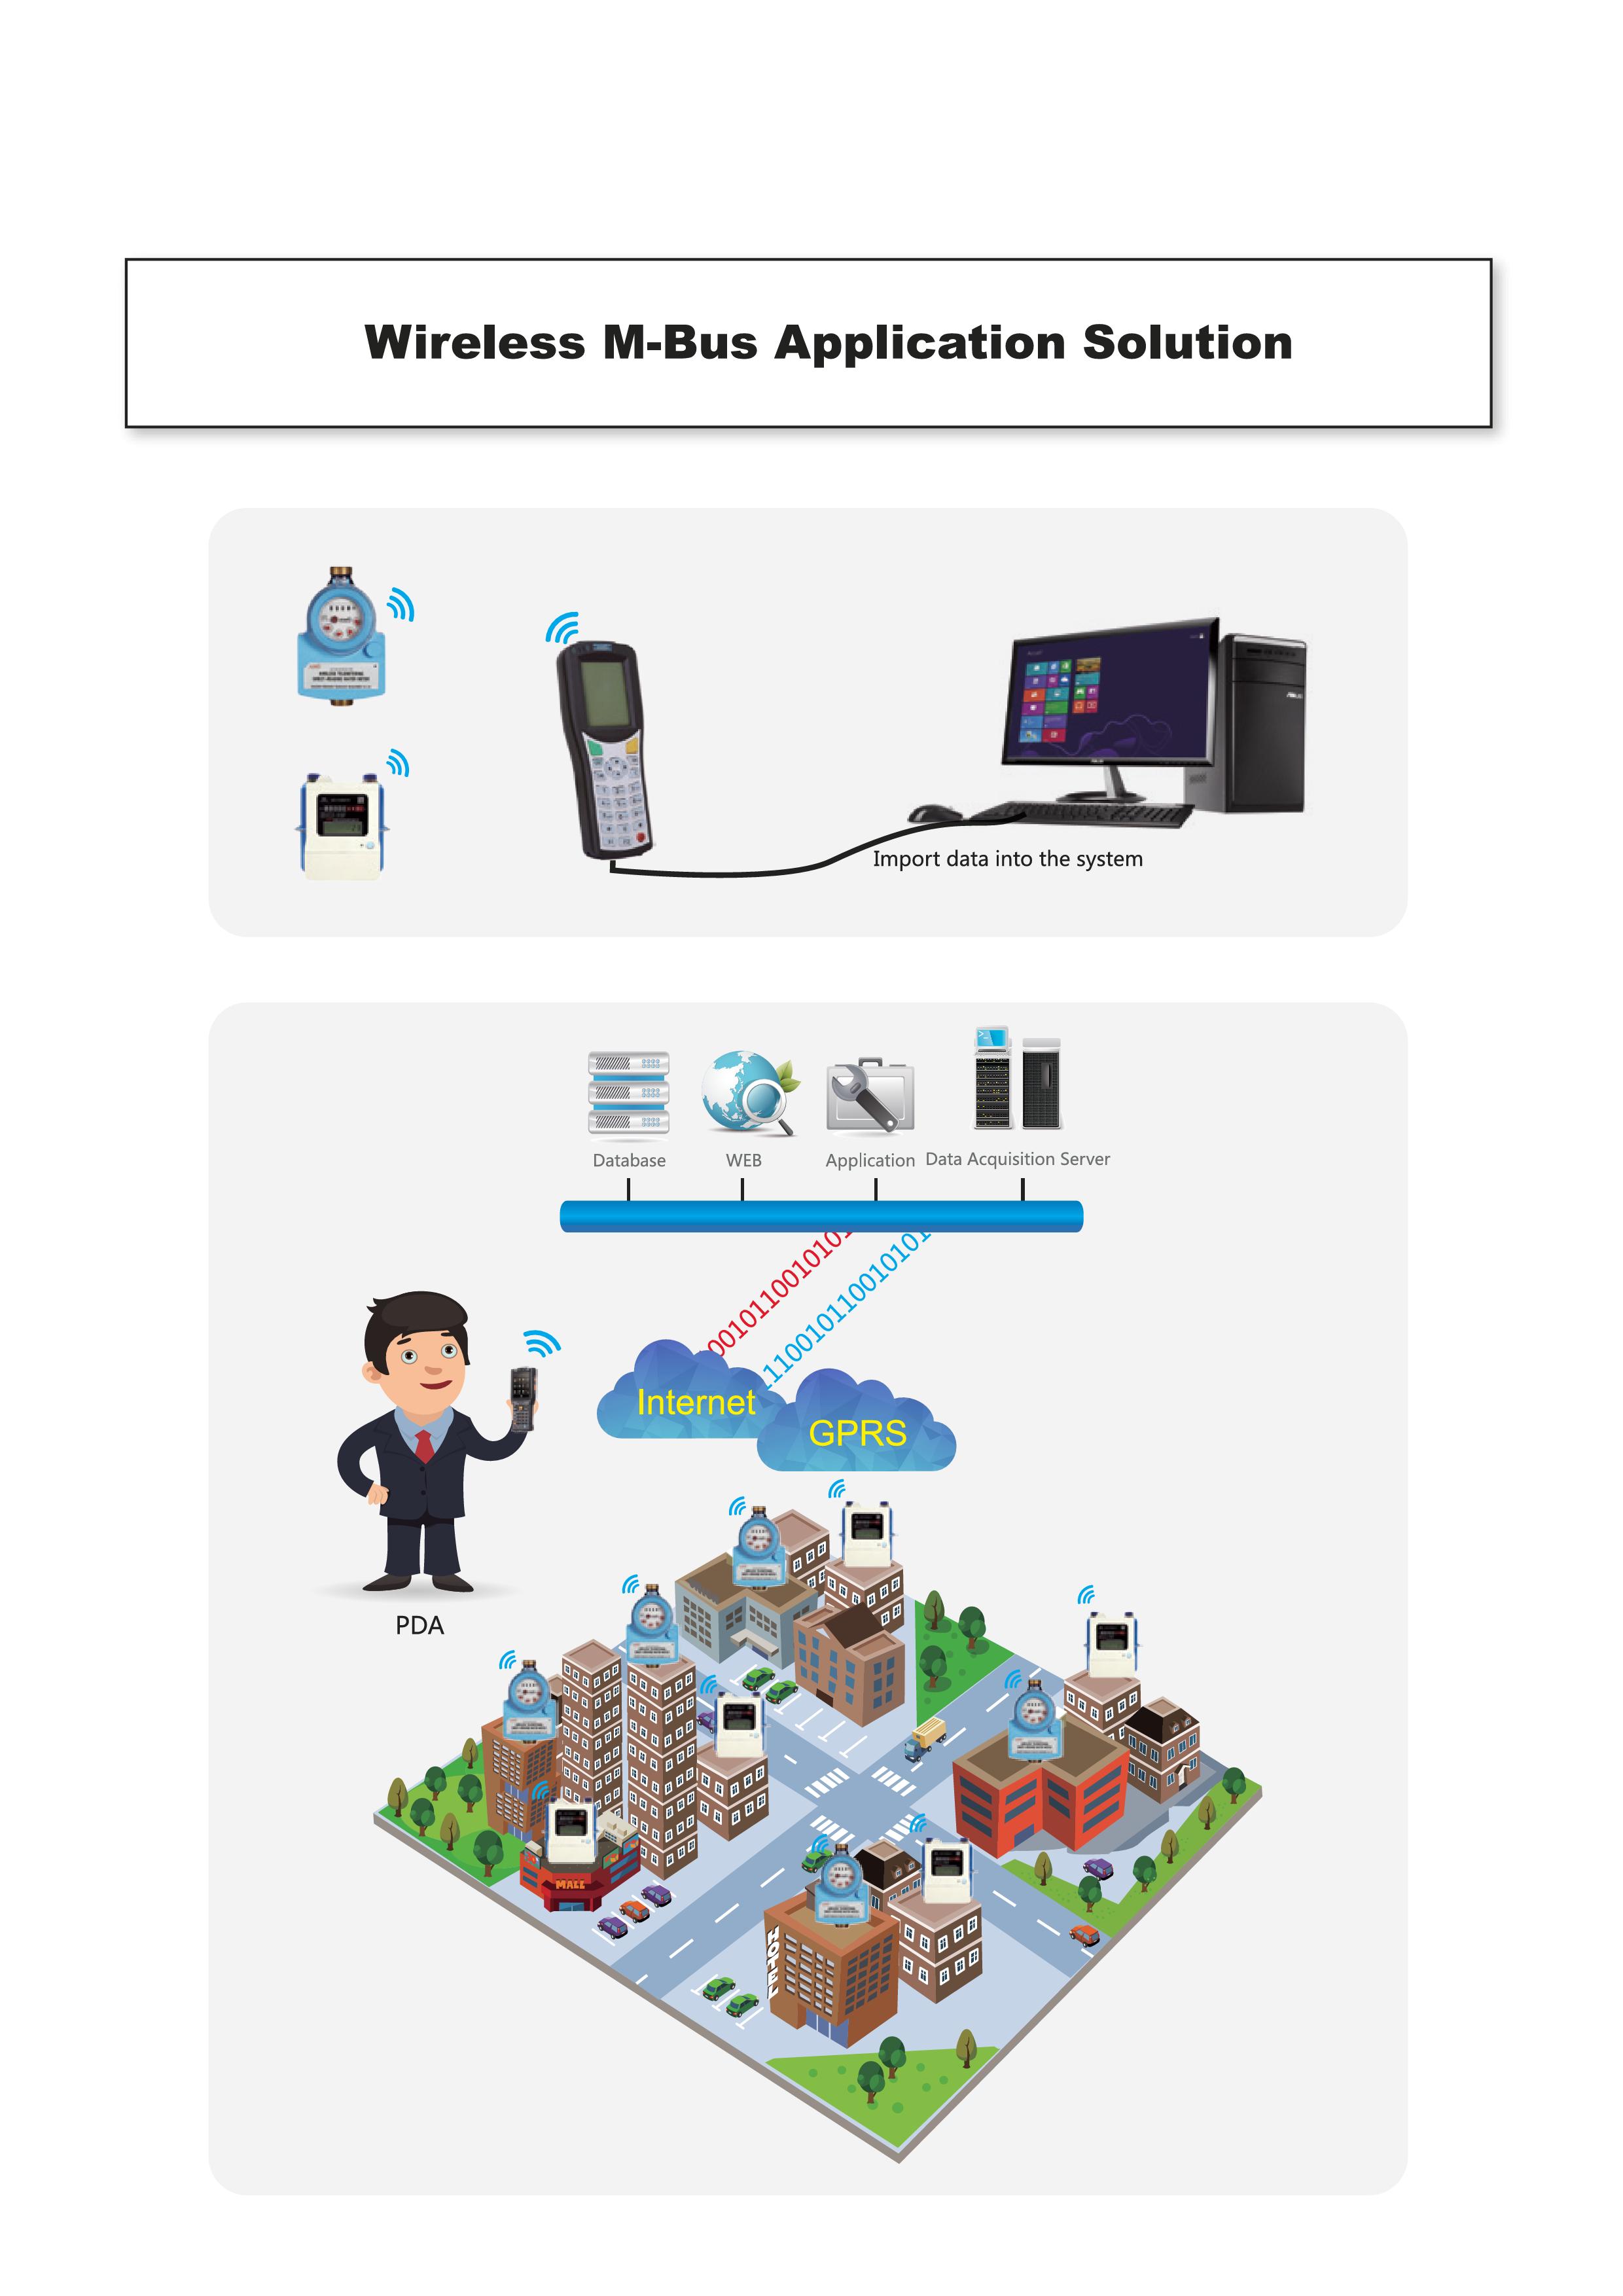 Wireless M-Bus Application Solution